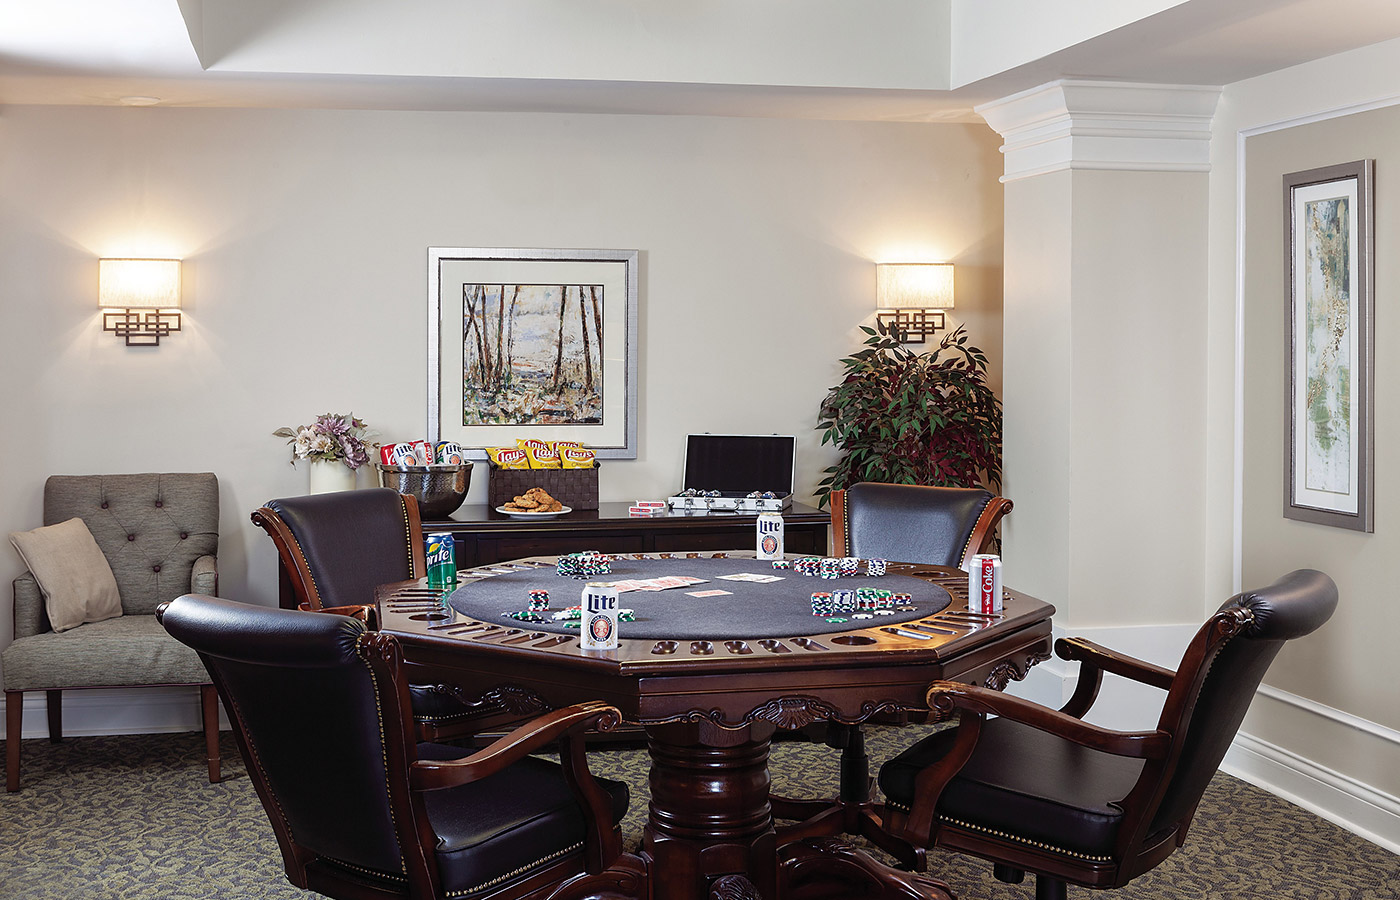 Poker table in game room.